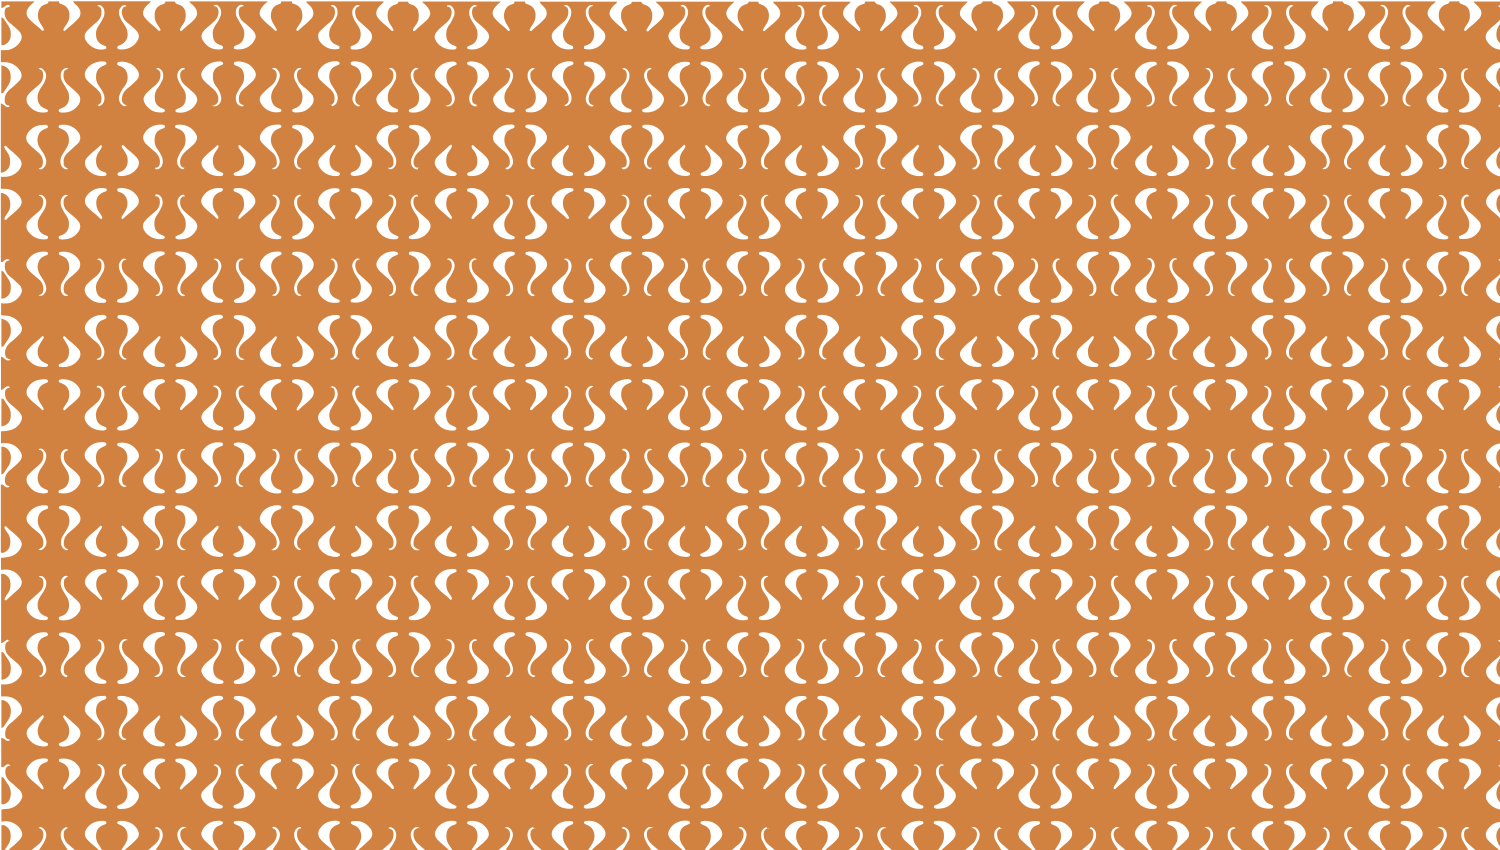 Parasoleil™ Onion© pattern displayed with a ochre color overlay